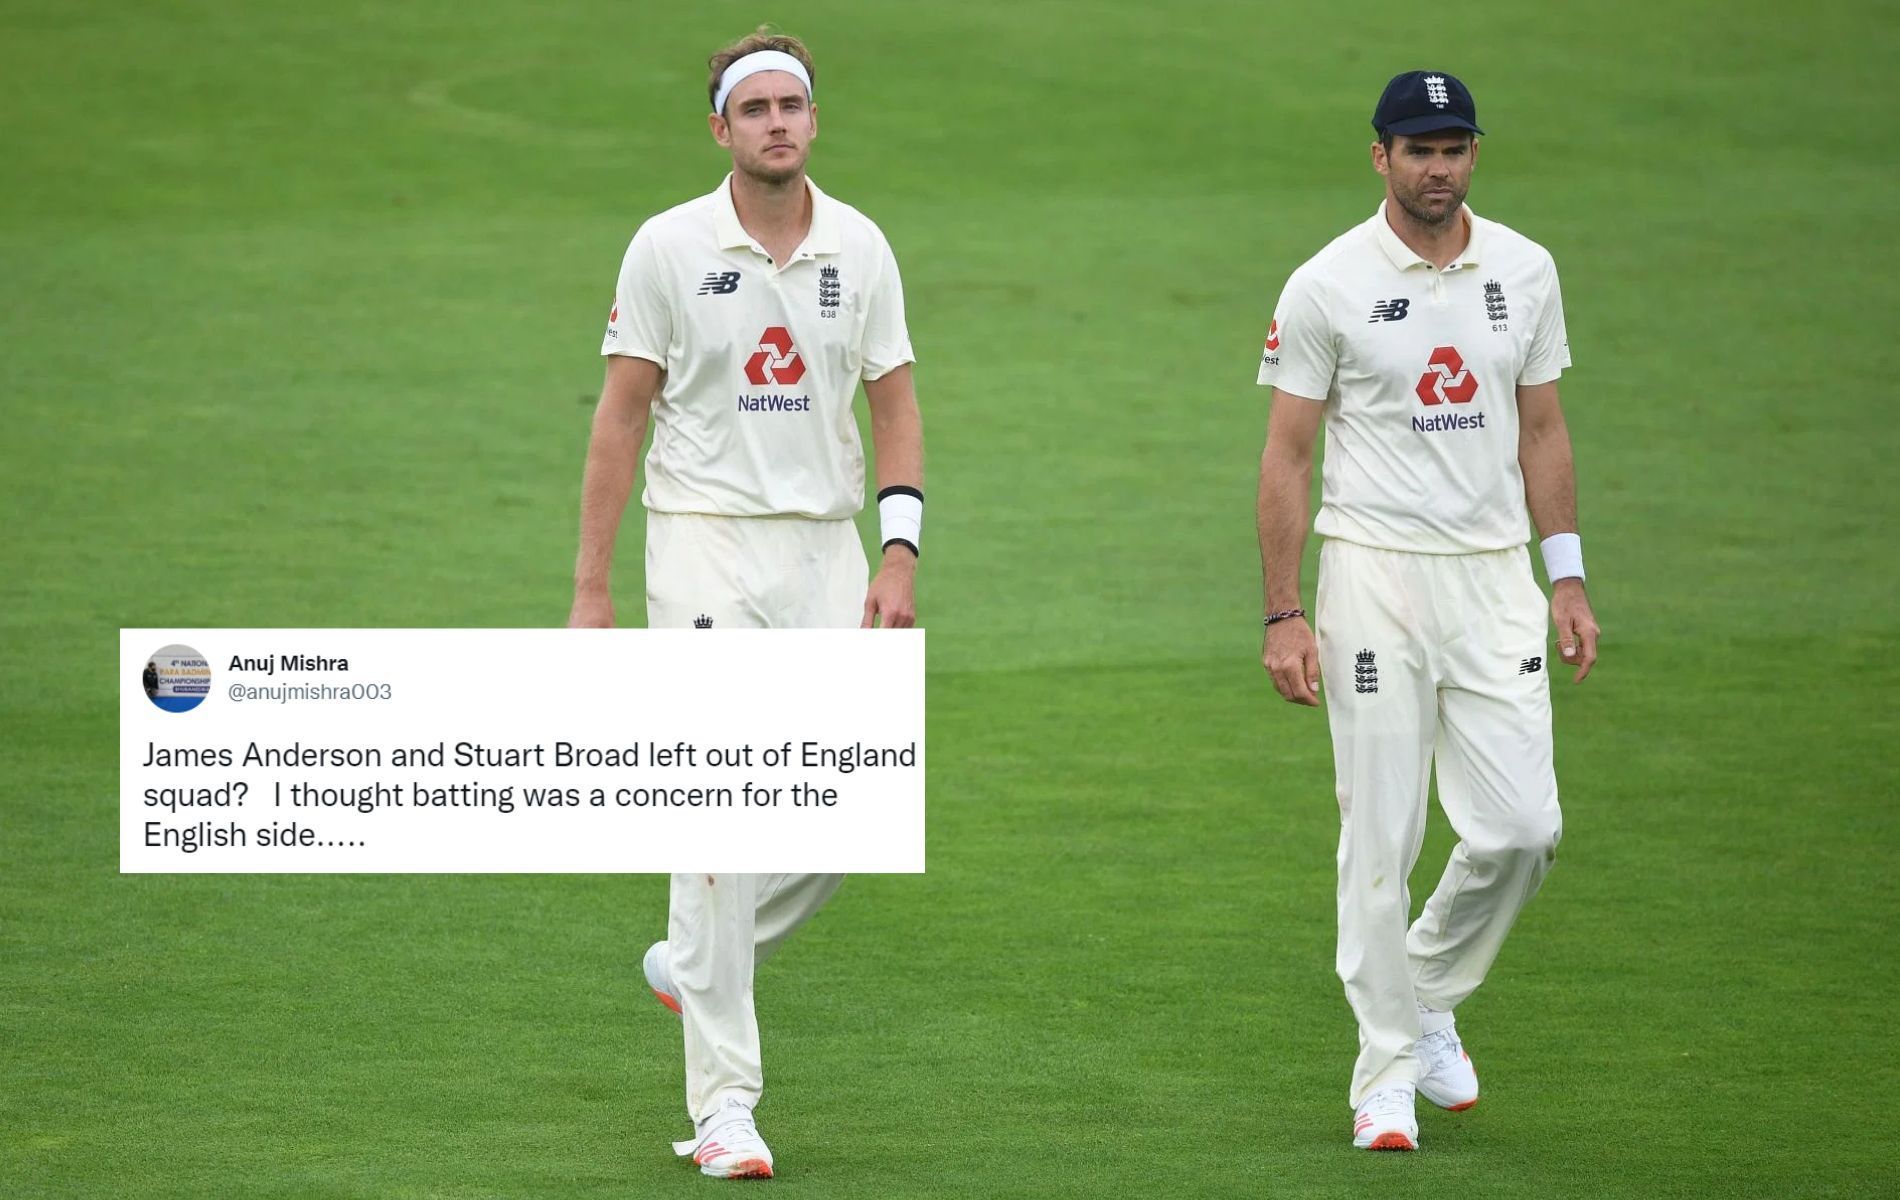 England left out their two most prolific pacers from their Test squad for their tour of the West Indies.